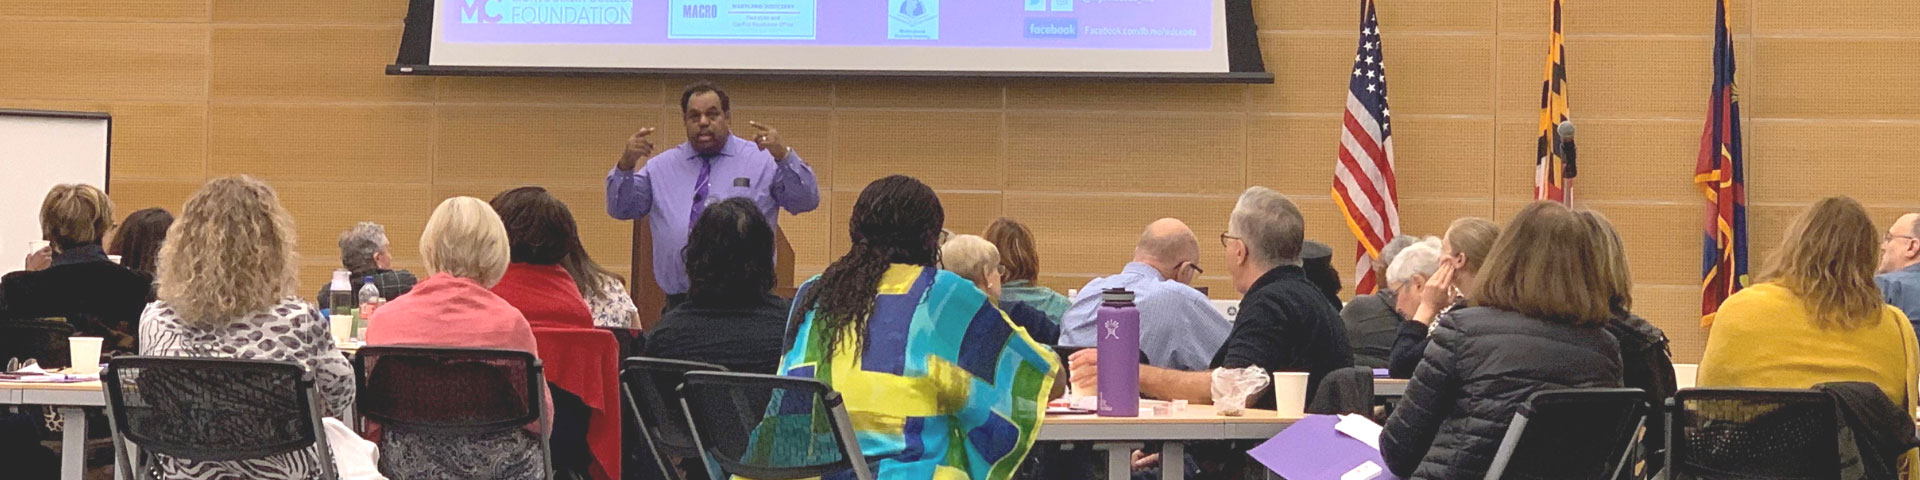 Daryl Davis presenting at a Colloquiumn at Montgomery College